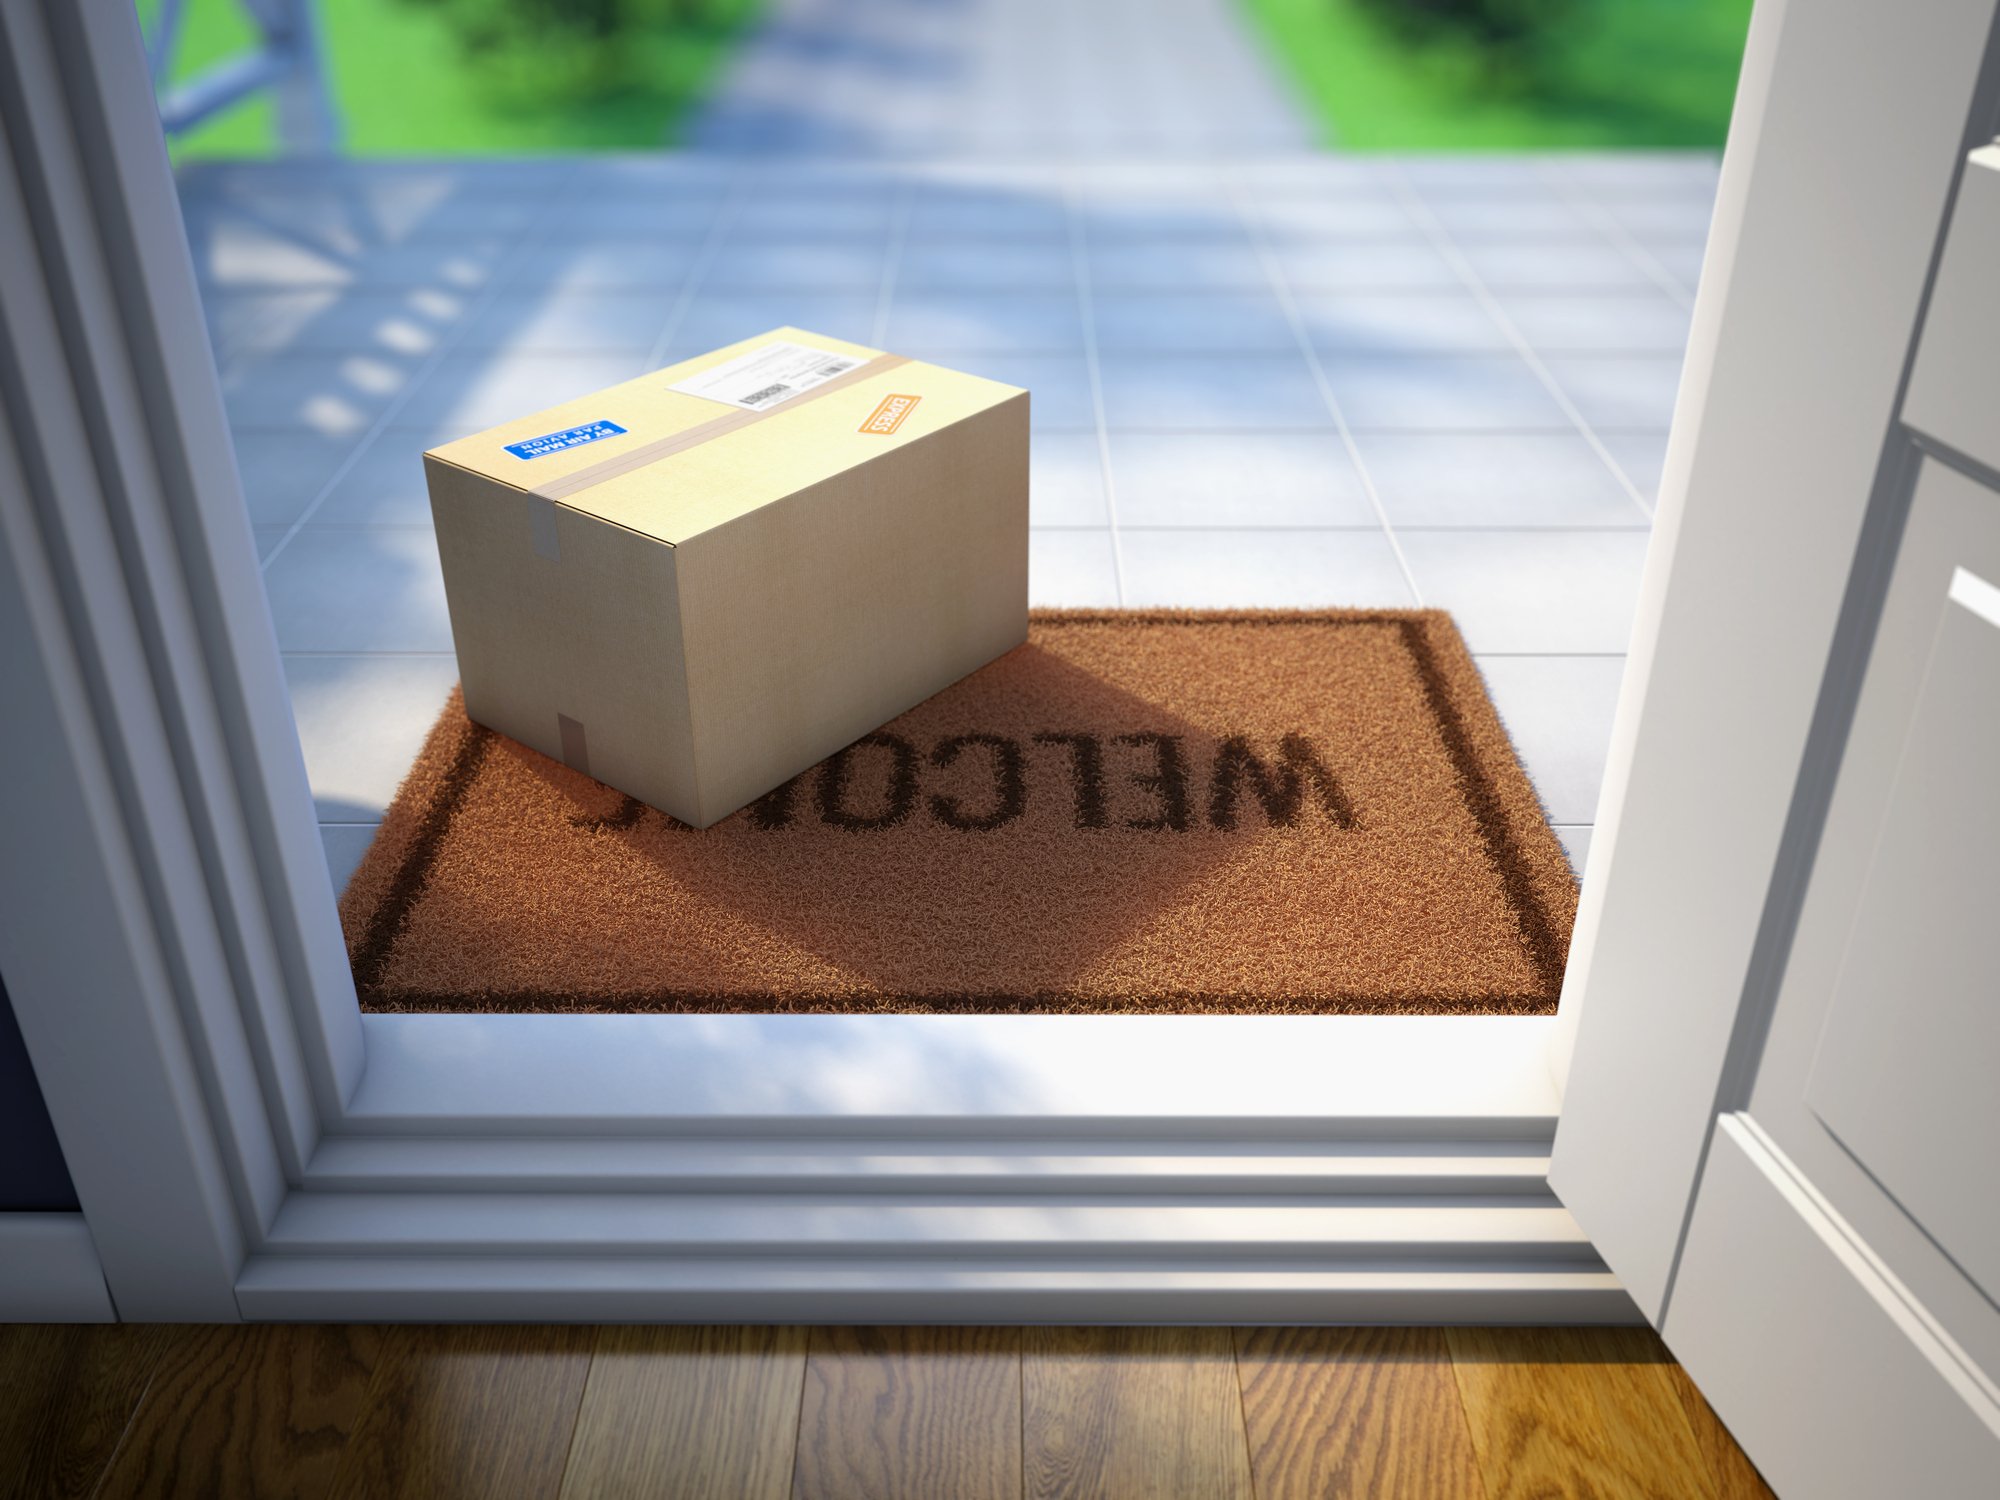 Graphic image of a cardboard box delivered to a doorstep with a welcome mat